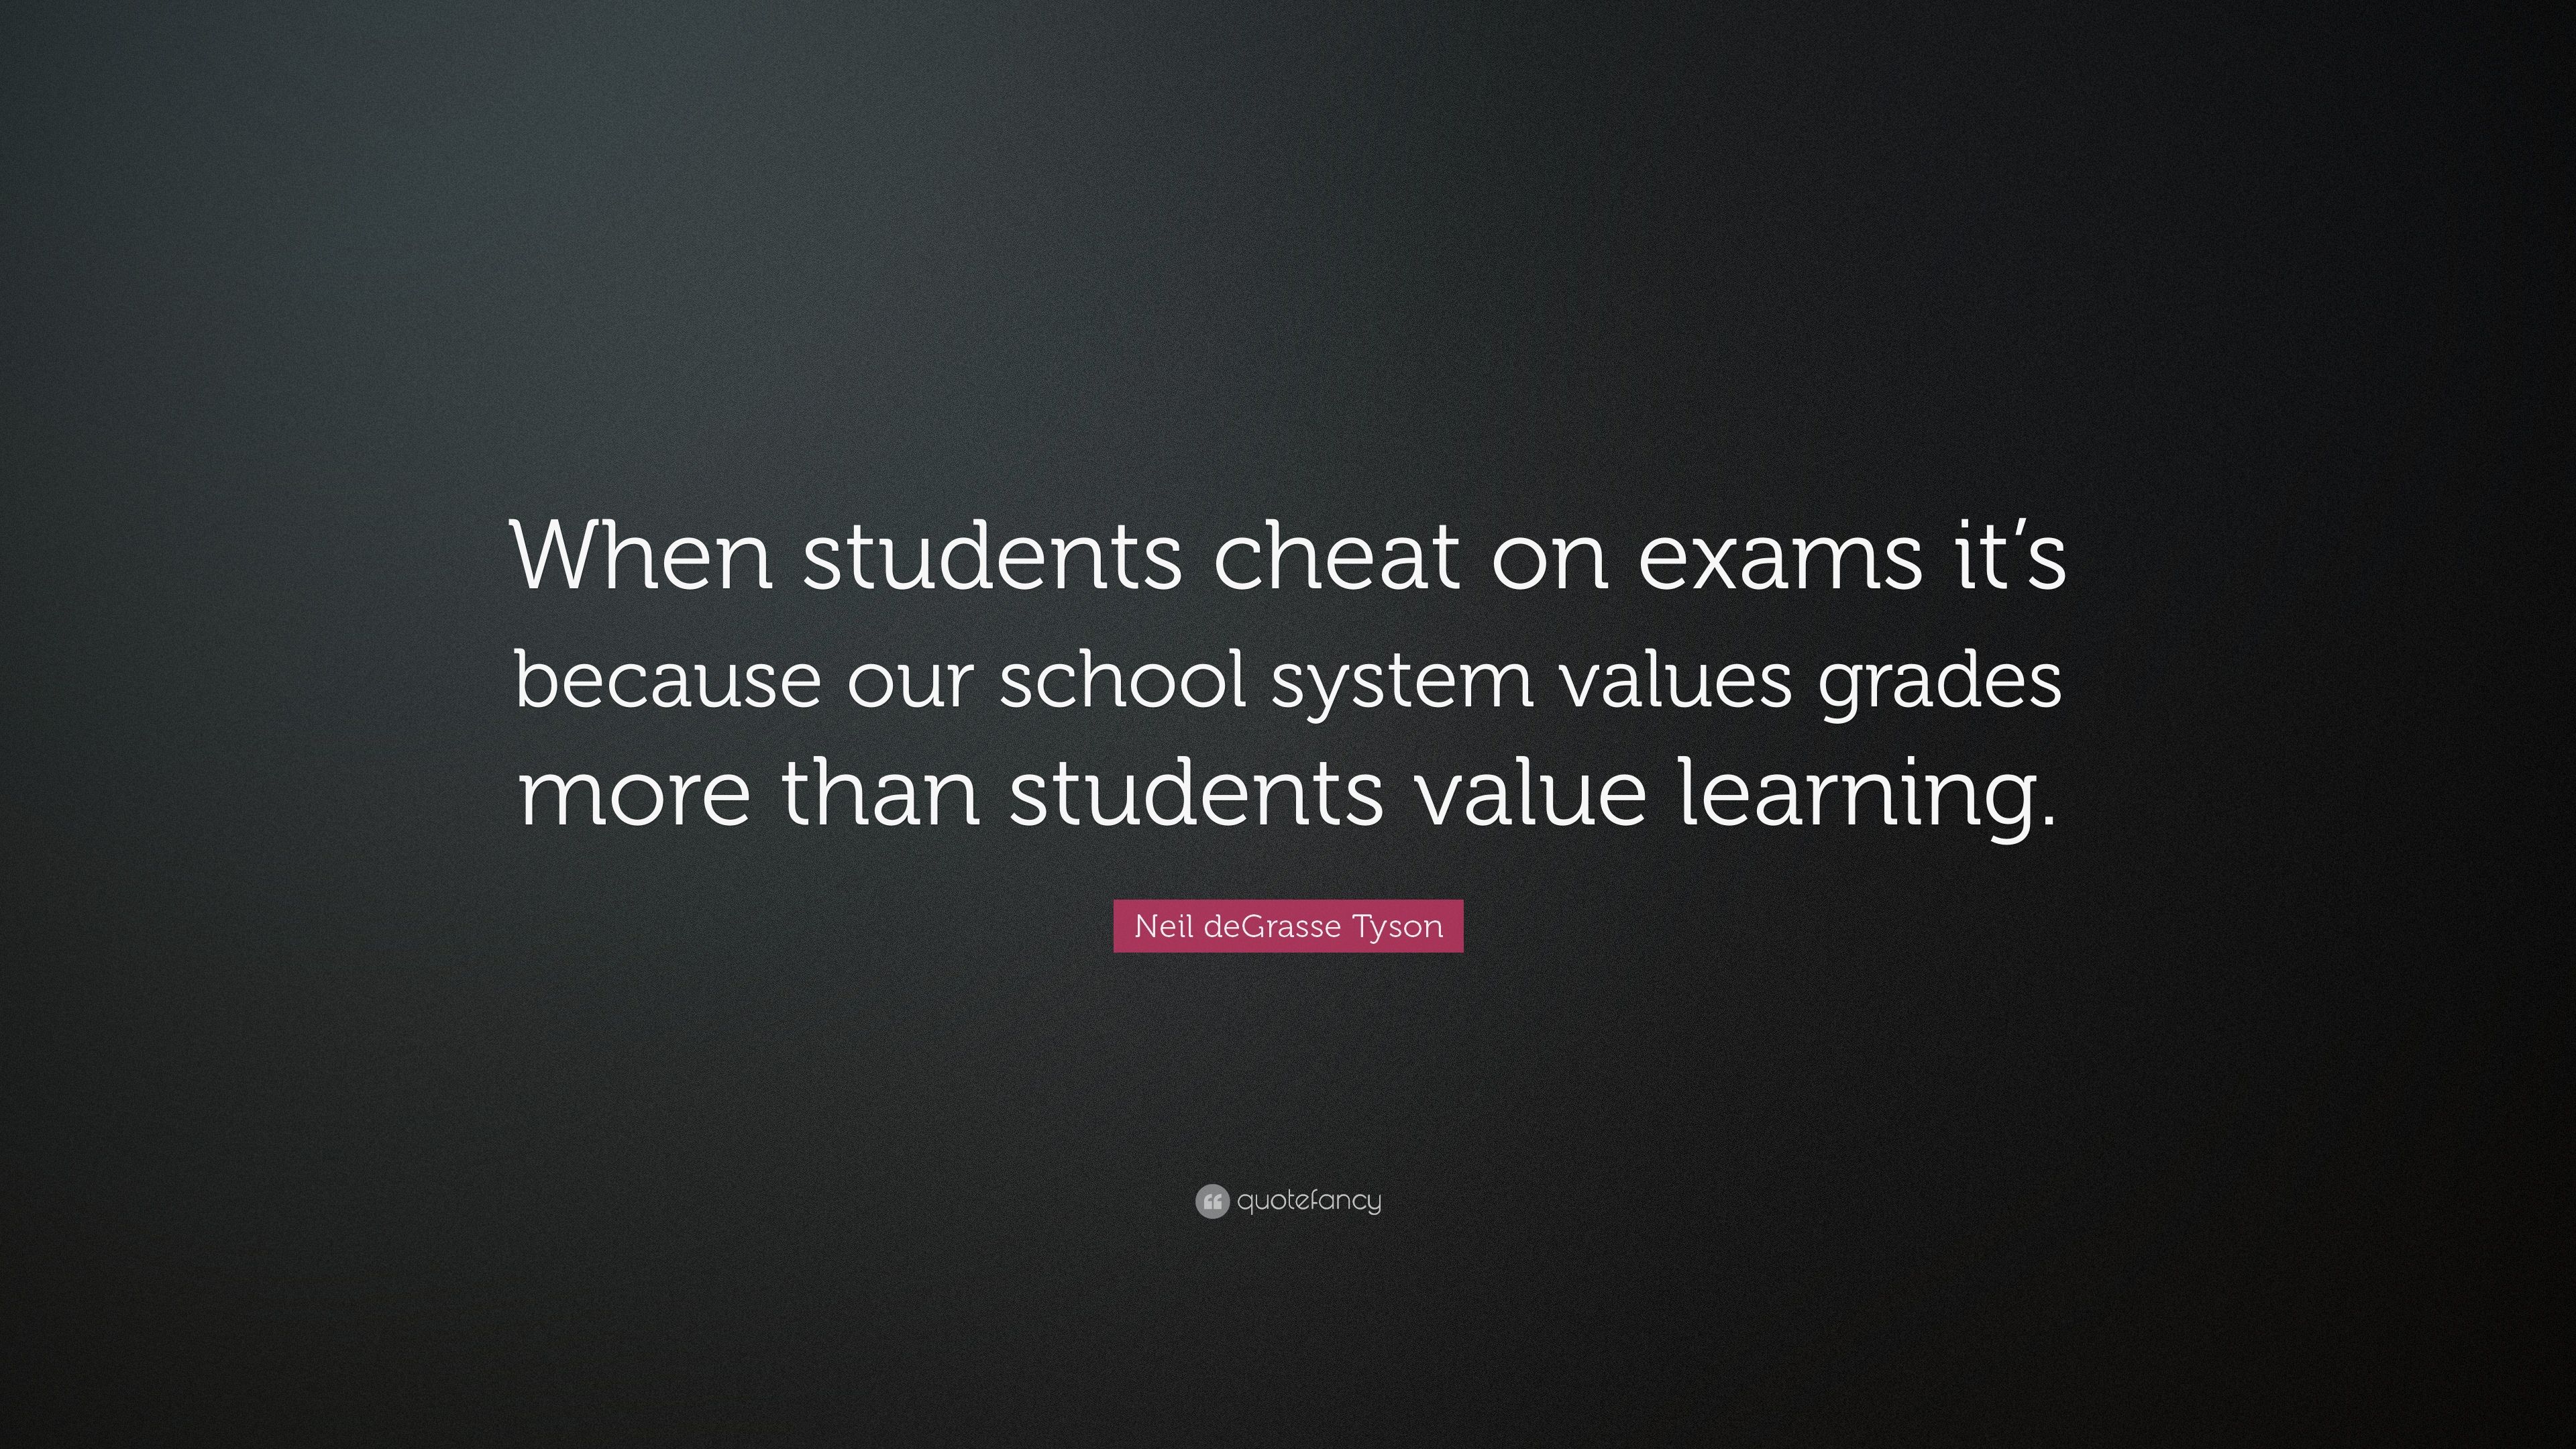 Neil deGrasse Tyson Quote: “When students cheat on exams it's